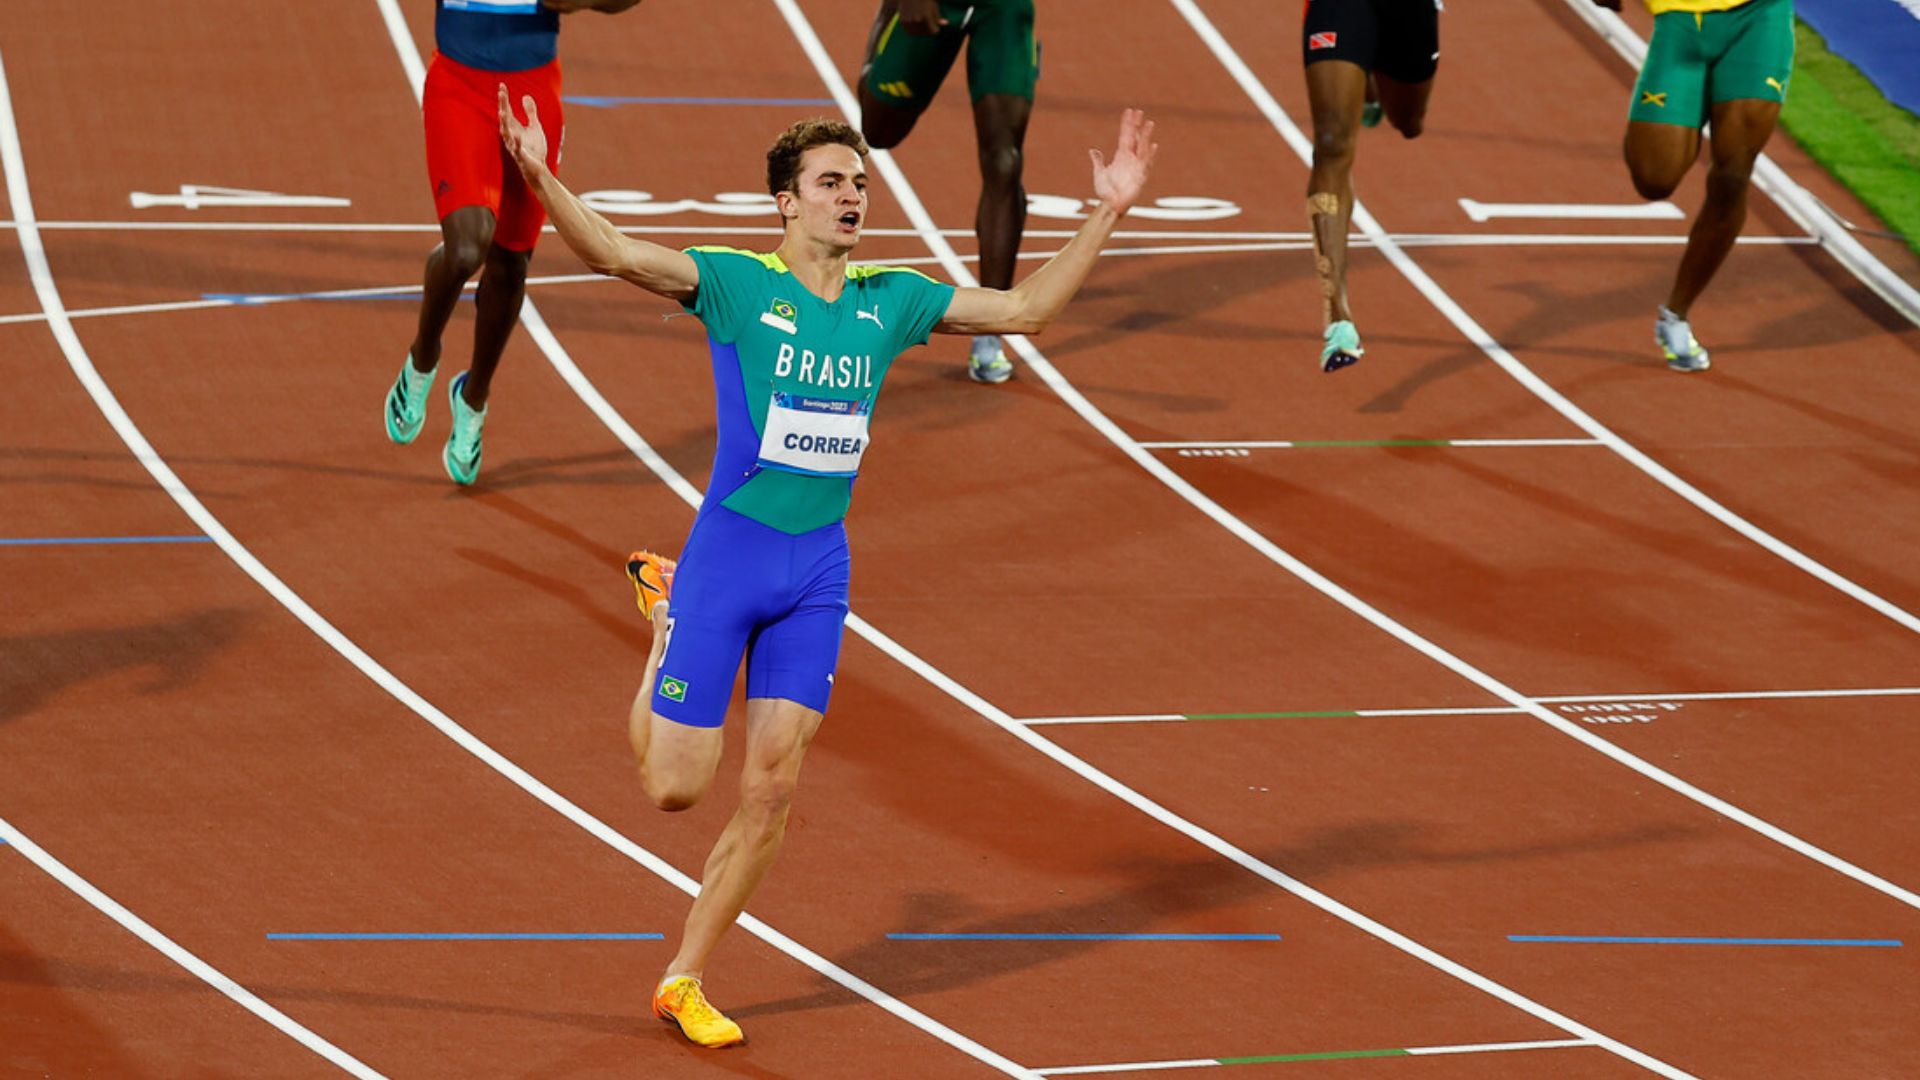 The young Renan Correa soars with the gold in the 200 meters for Brazil